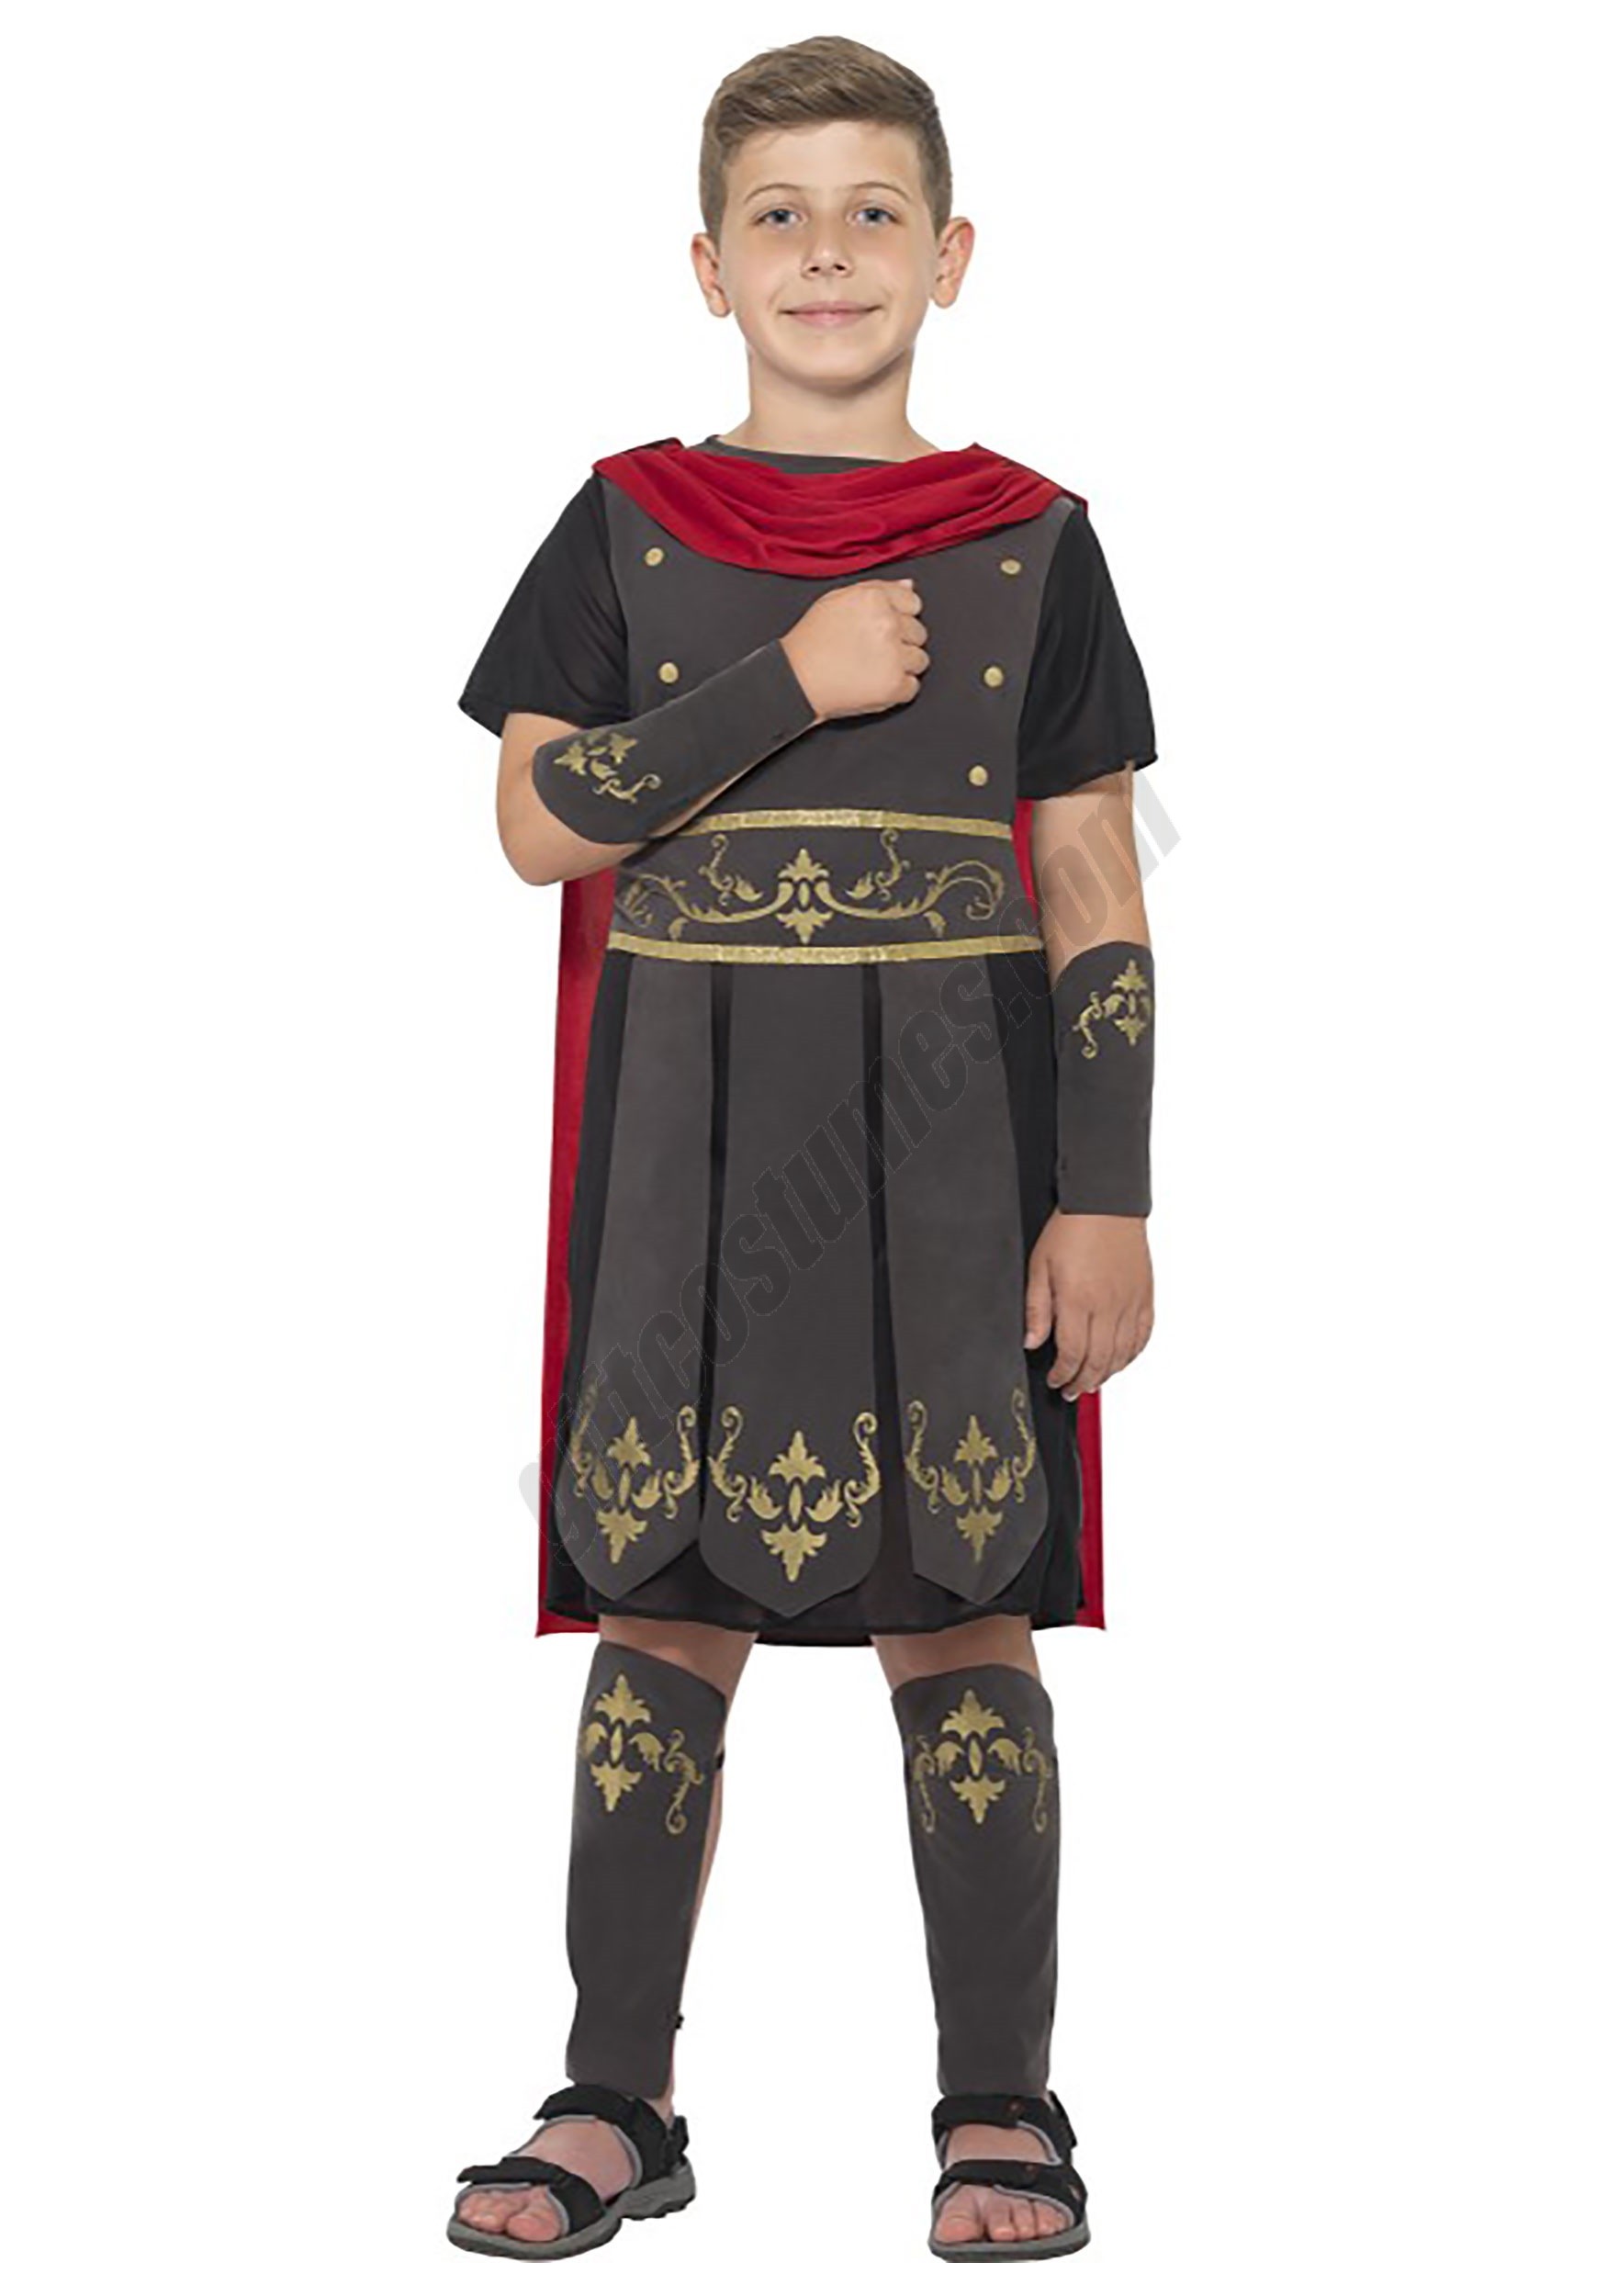 Roman Soldier Costume for Boys Promotions - Roman Soldier Costume for Boys Promotions